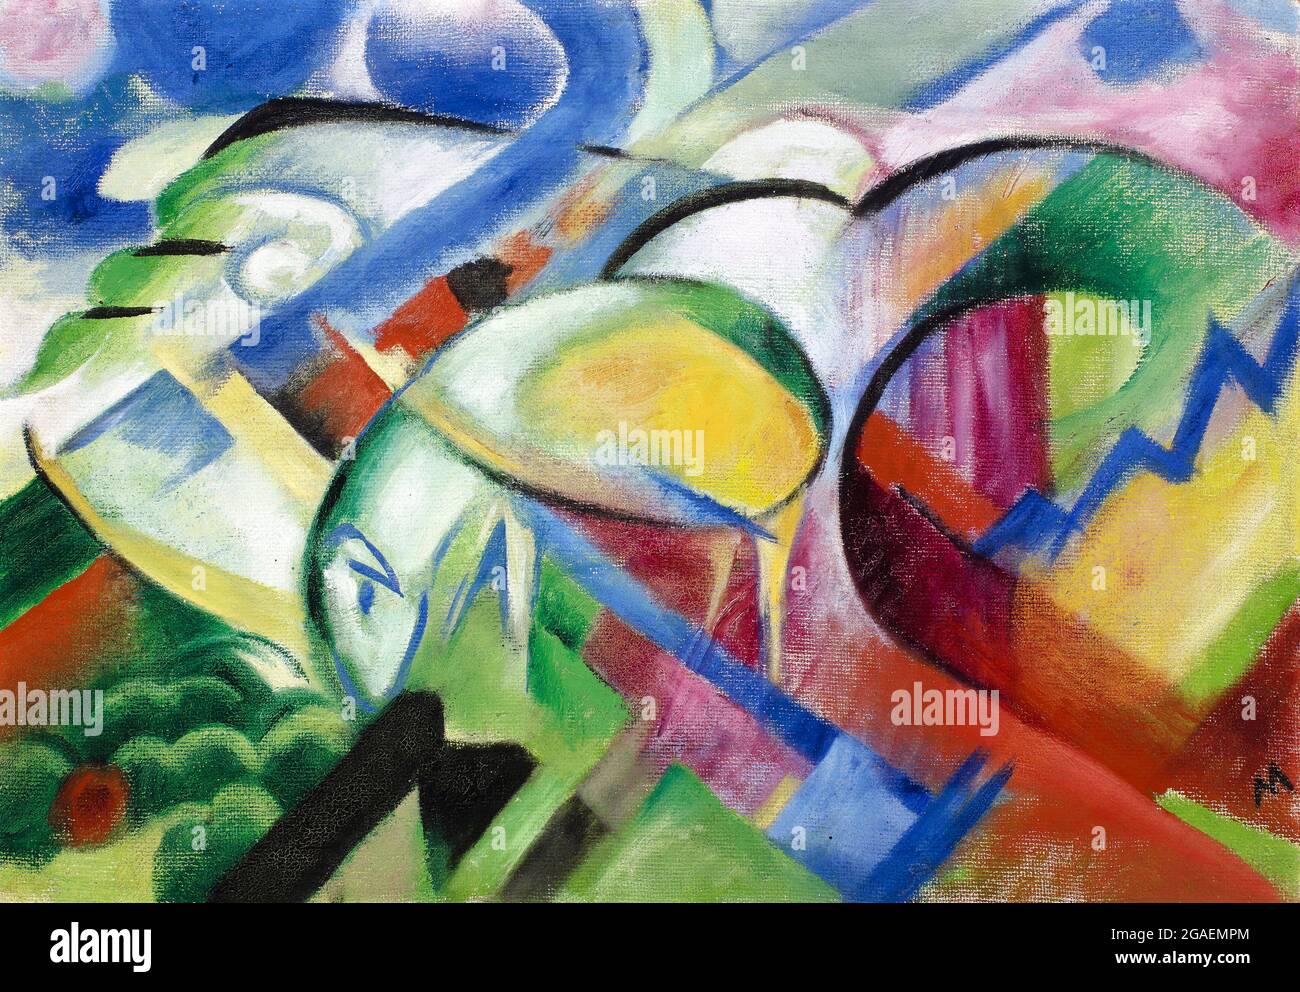 Franz Marc. Painting entitled The Sheep, oil on canvas, c. 1913/14.  Franz Moritz Wilhelm Marc (1880-1916) was a leading figure in the German Expressionist movement Stock Photo